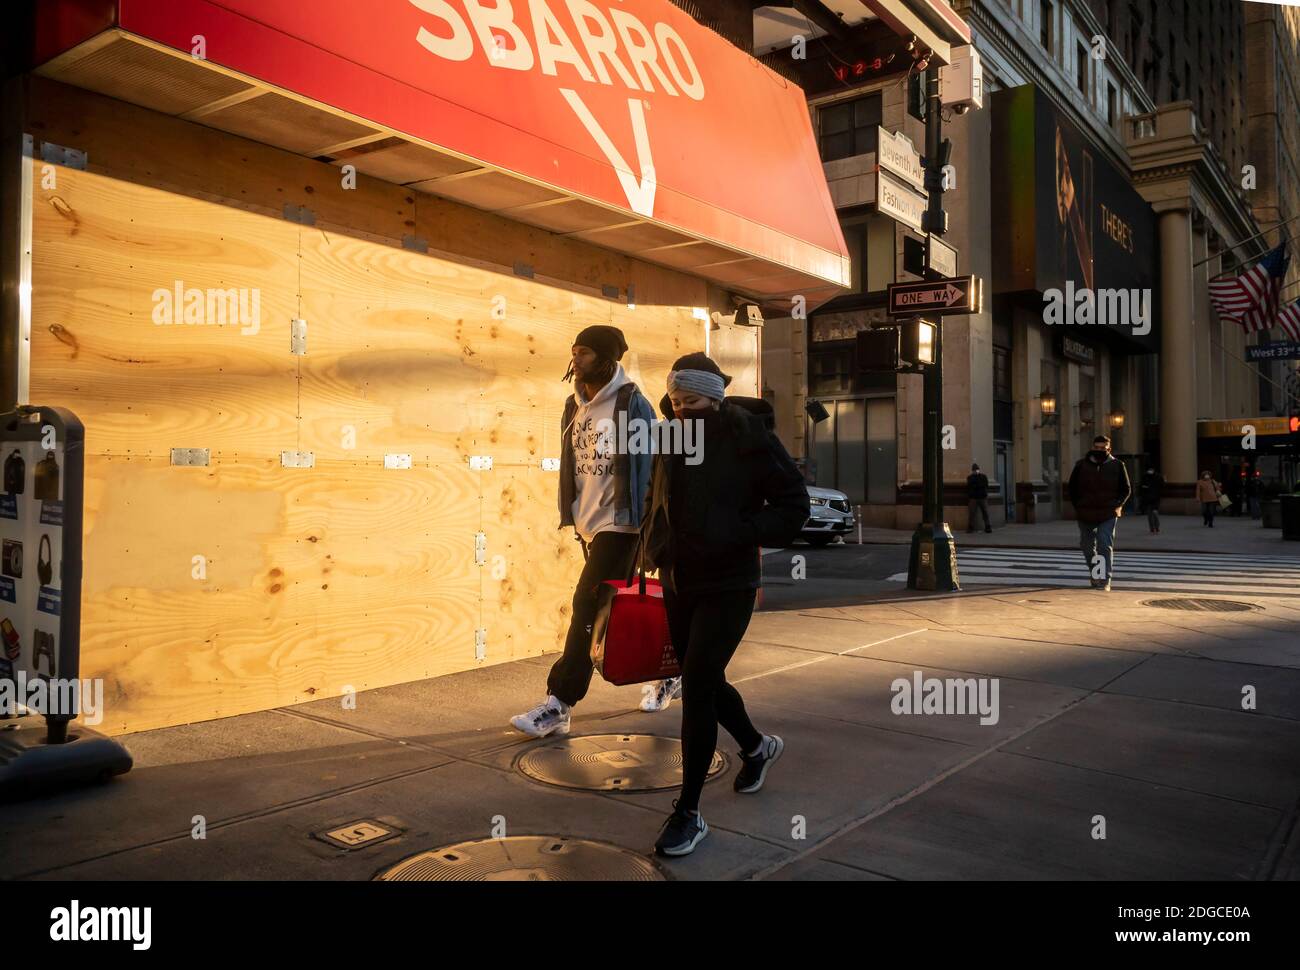 People pass a closed branch of the Sbarro Italian restaurant chain in the Herald Square neighborhood of New York on Monday, December 7, 2020. (© Richard B. Levine) Stock Photo